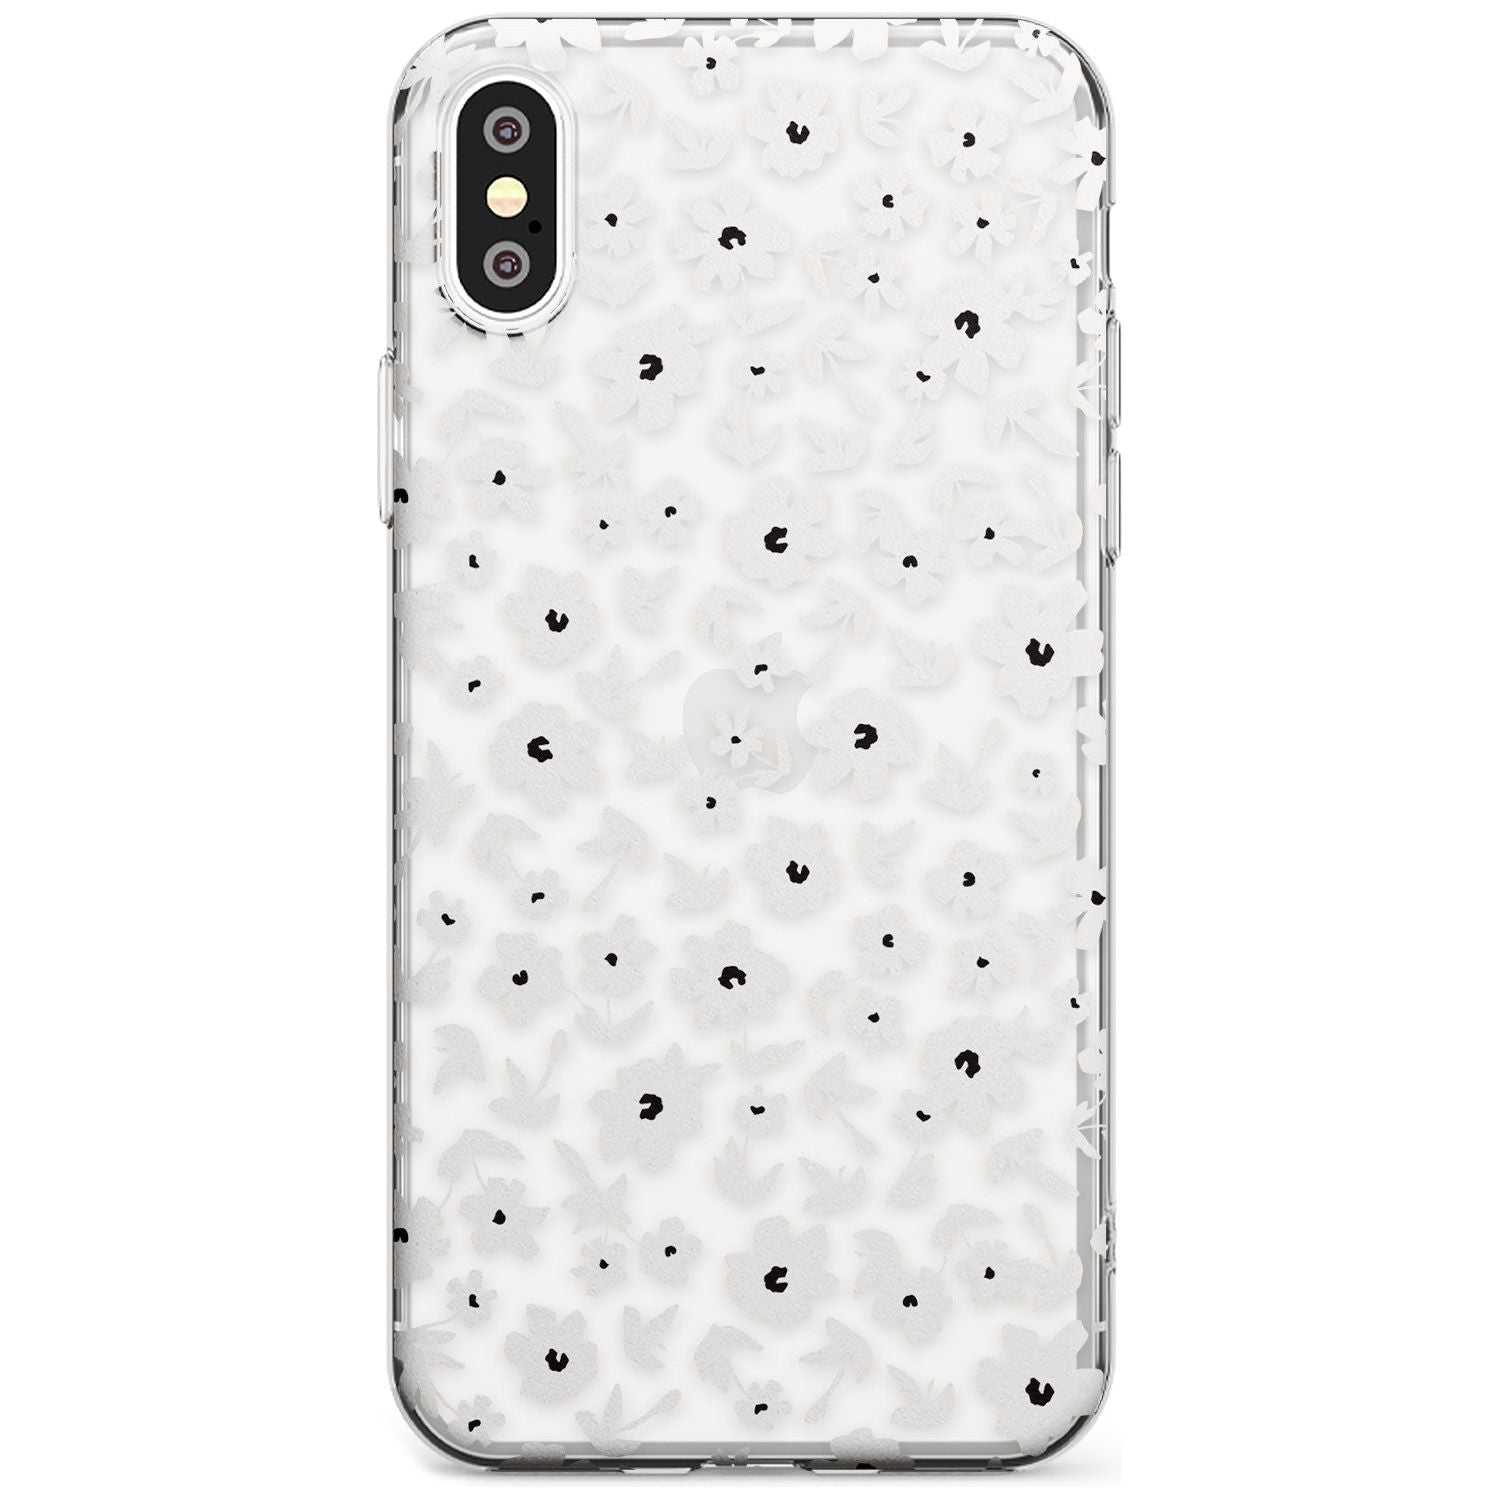 Floral Print on Clear - Cute Floral Design Black Impact Phone Case for iPhone X XS Max XR